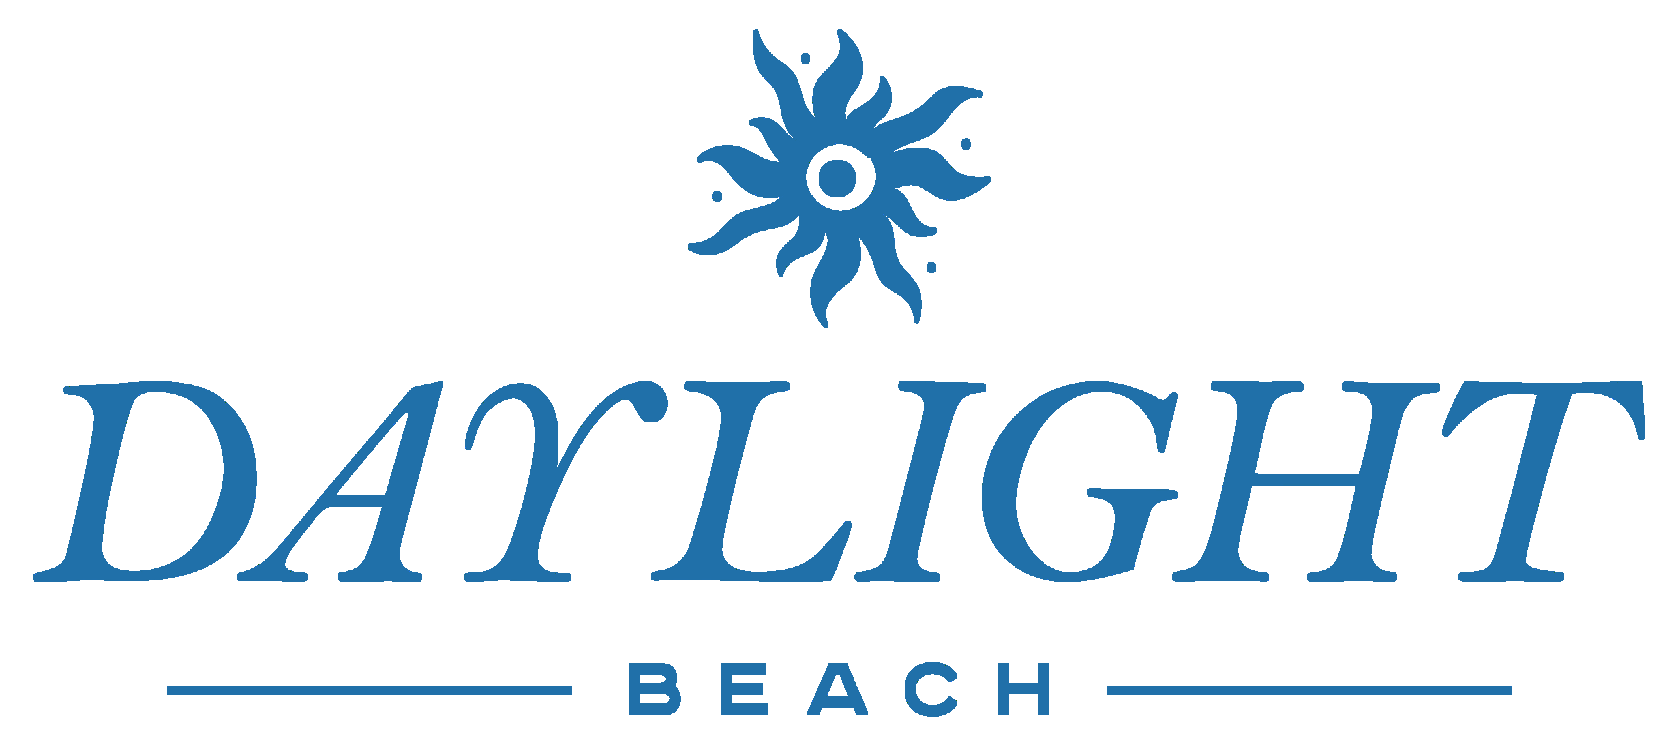 Daylight Beach Club Cabanas  Bottle Prices and Reservations